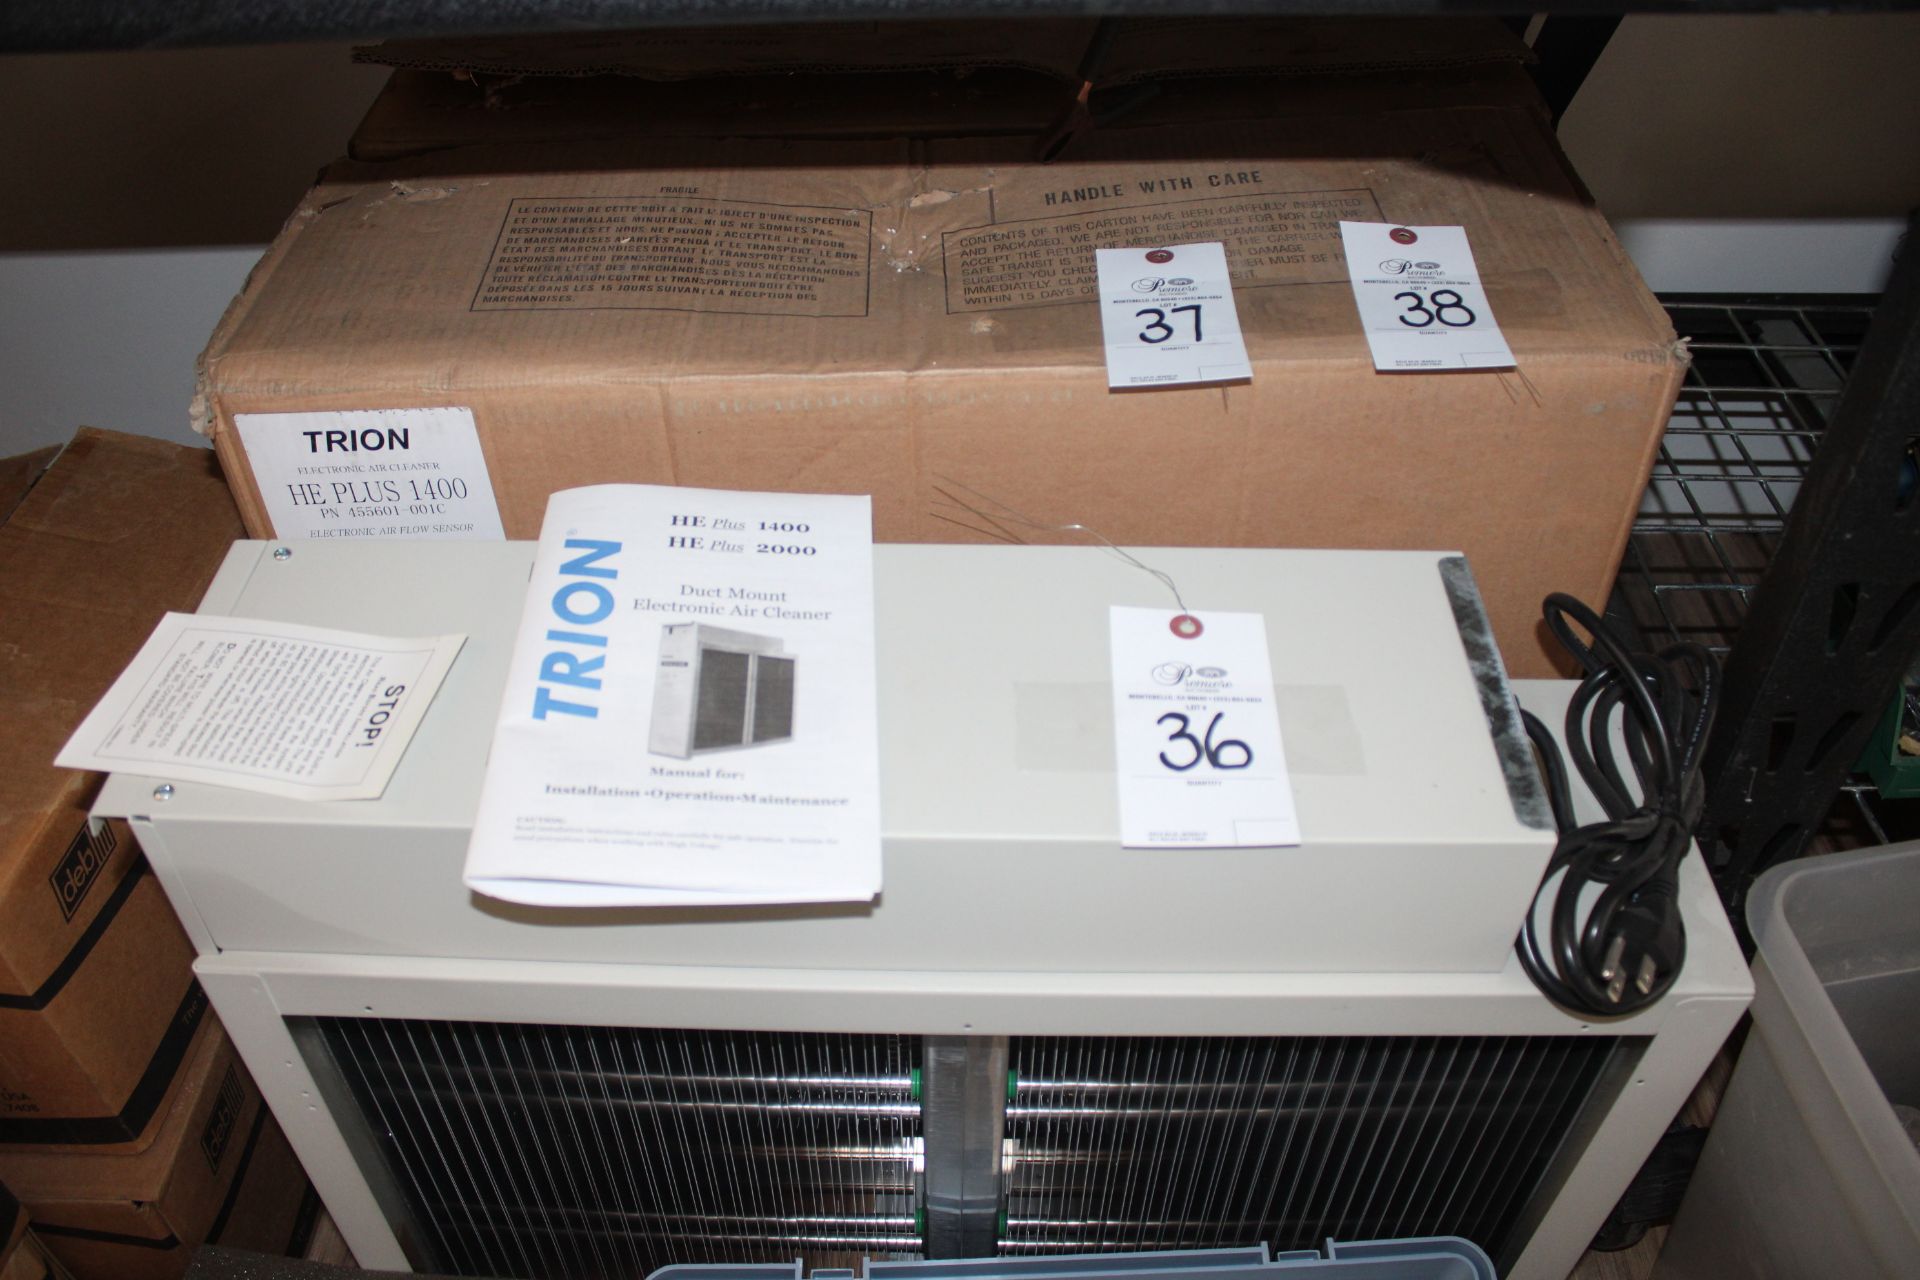 TRION HE PLUS 1400 ELECTRONIC AIR CLEAN **NEW**